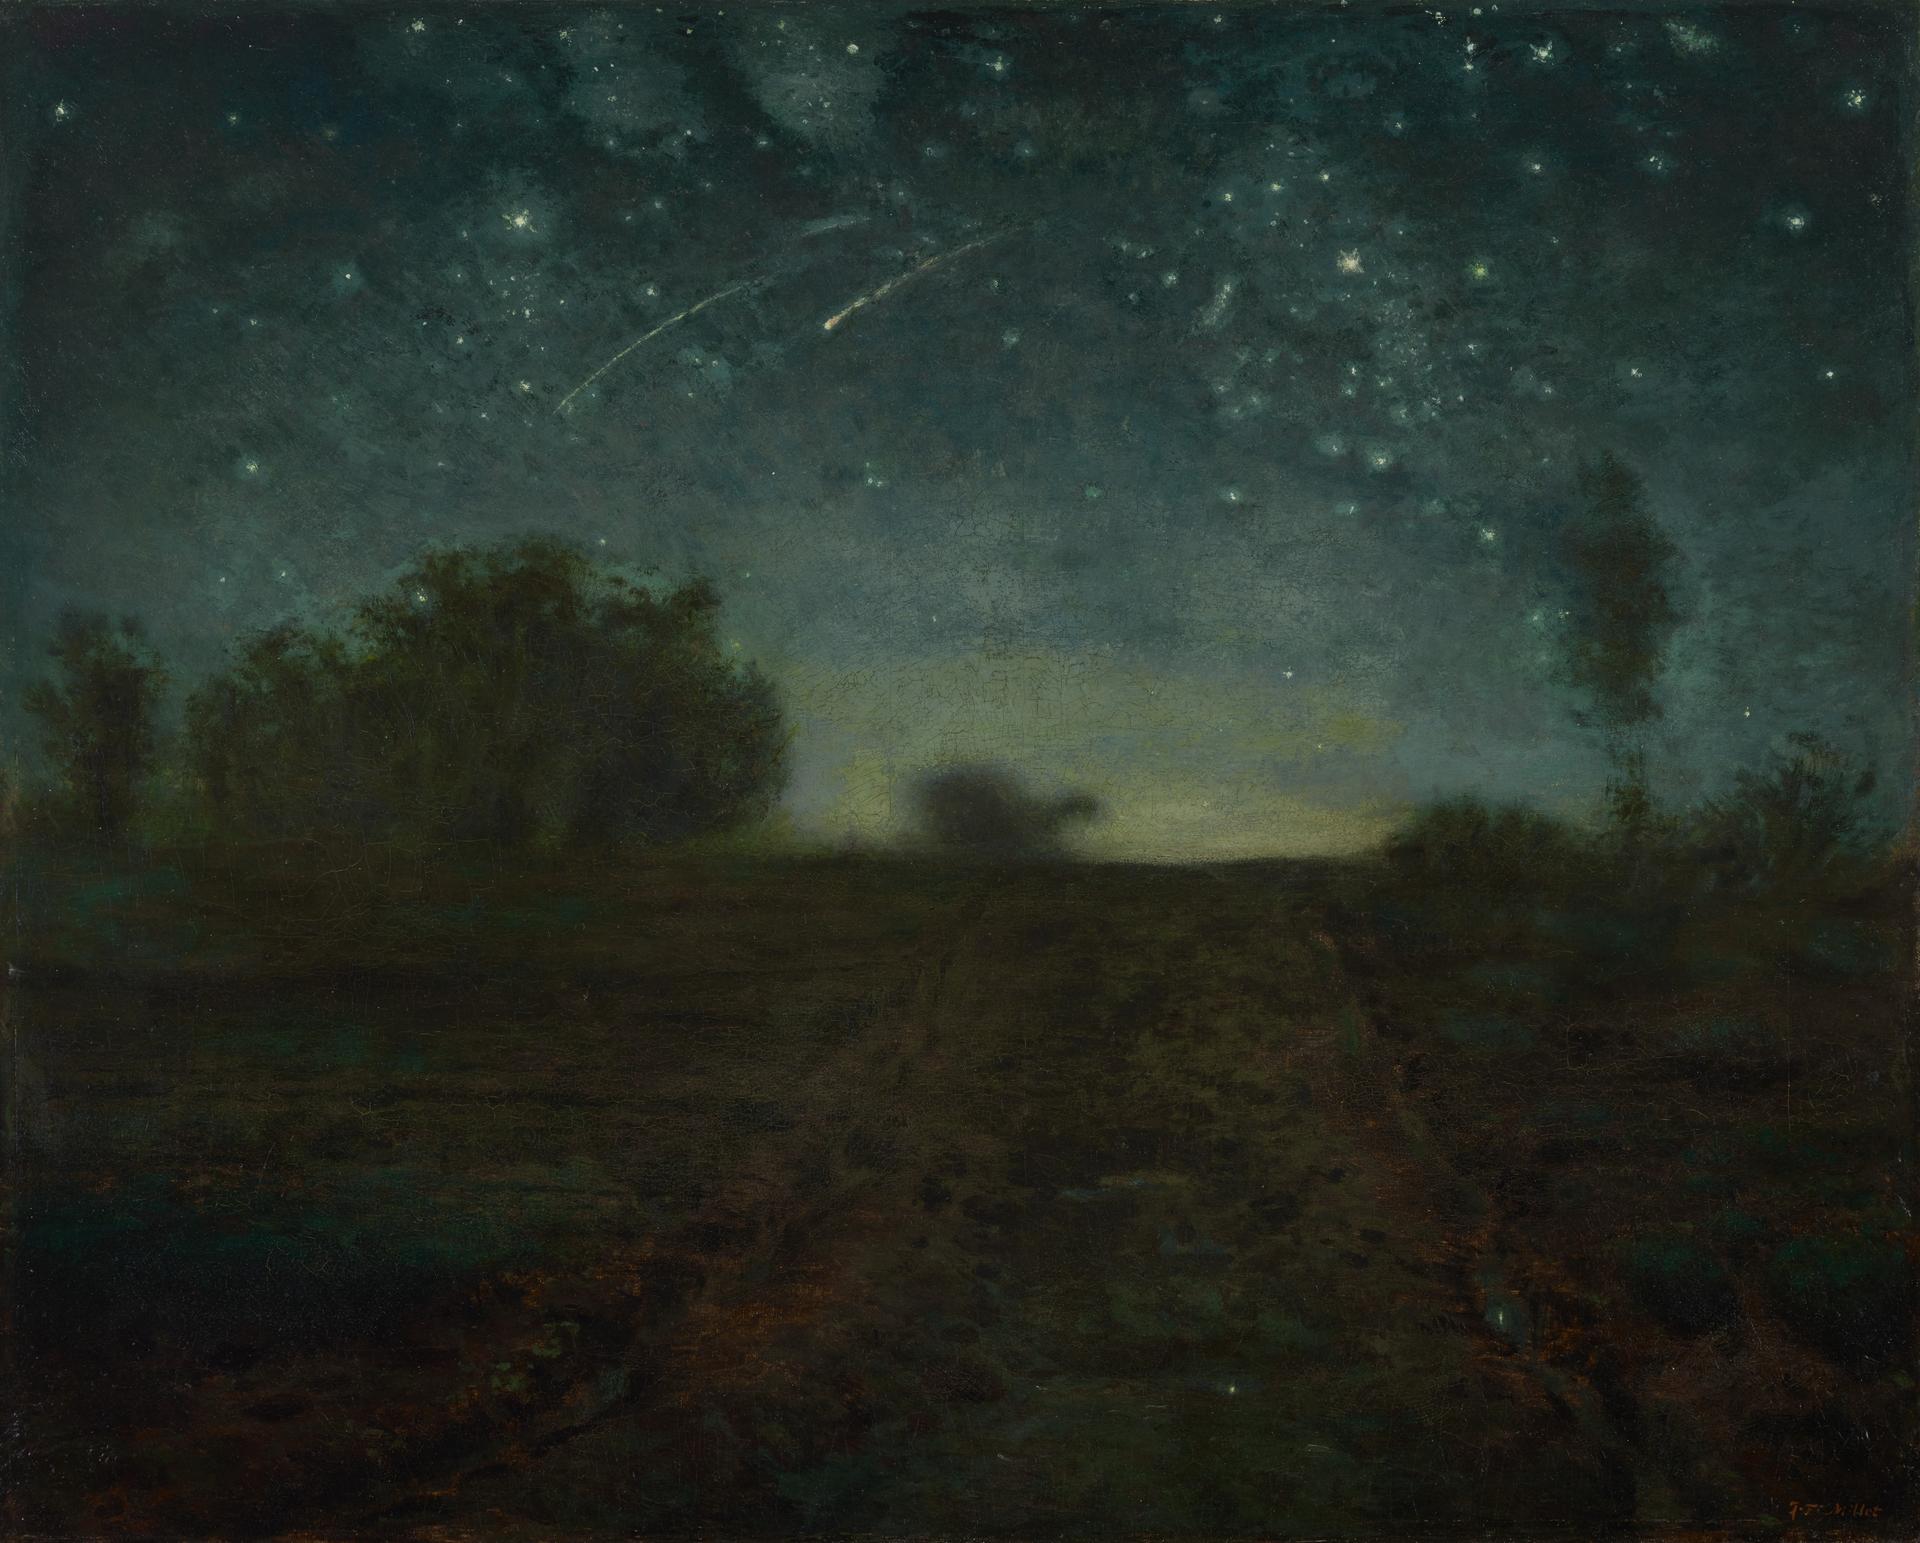 a painting of a path through a field at night, with a star-filled sky above